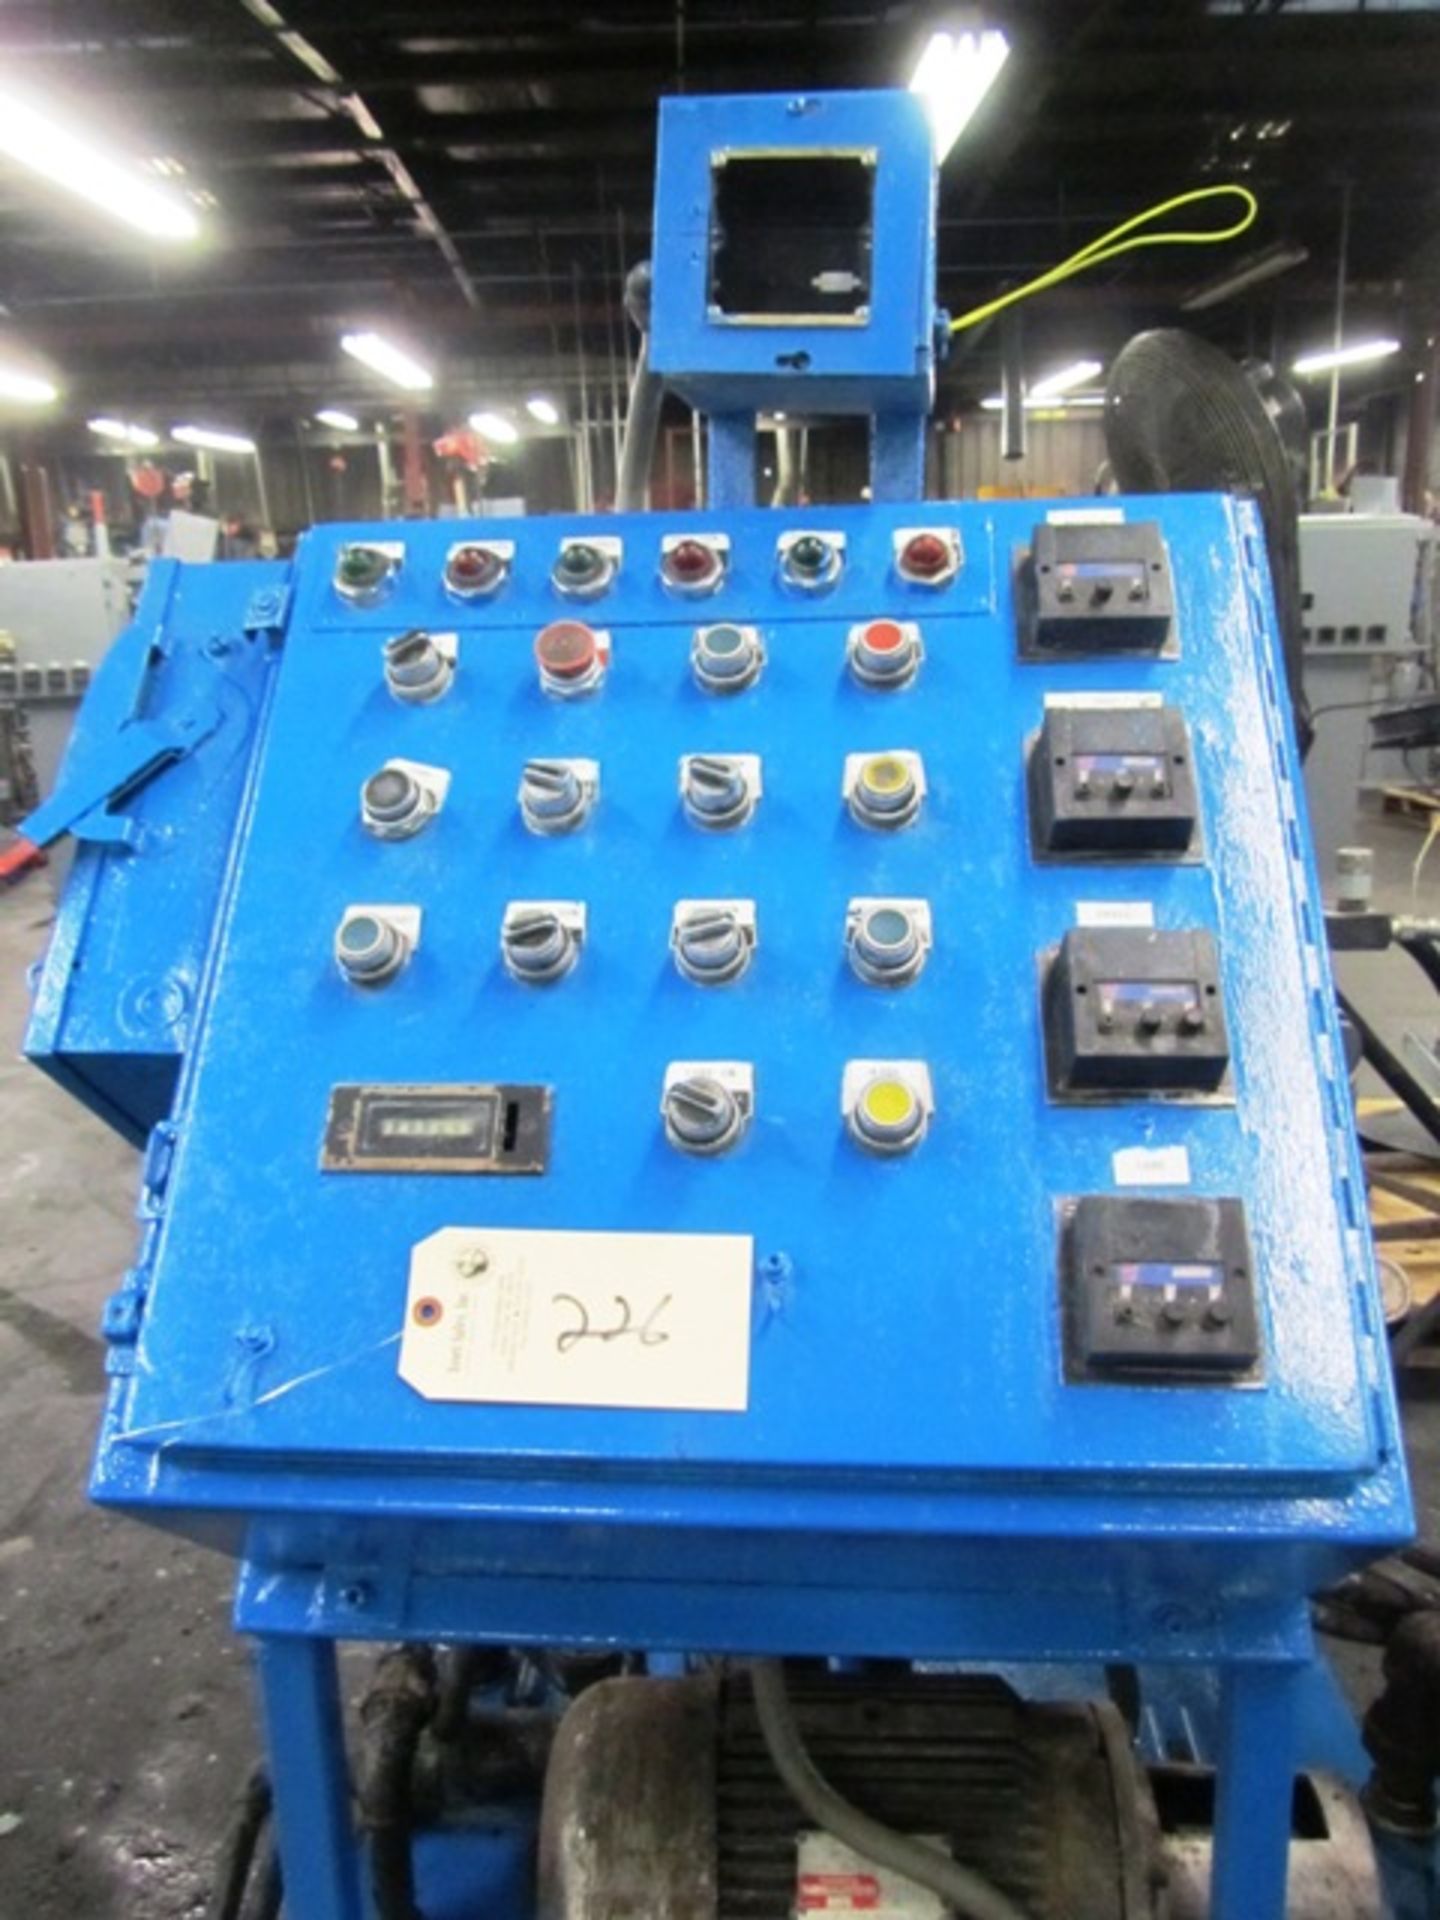 HPM Avnet H-20/35 Interchangeable Die Casting Machine - Image 2 of 3